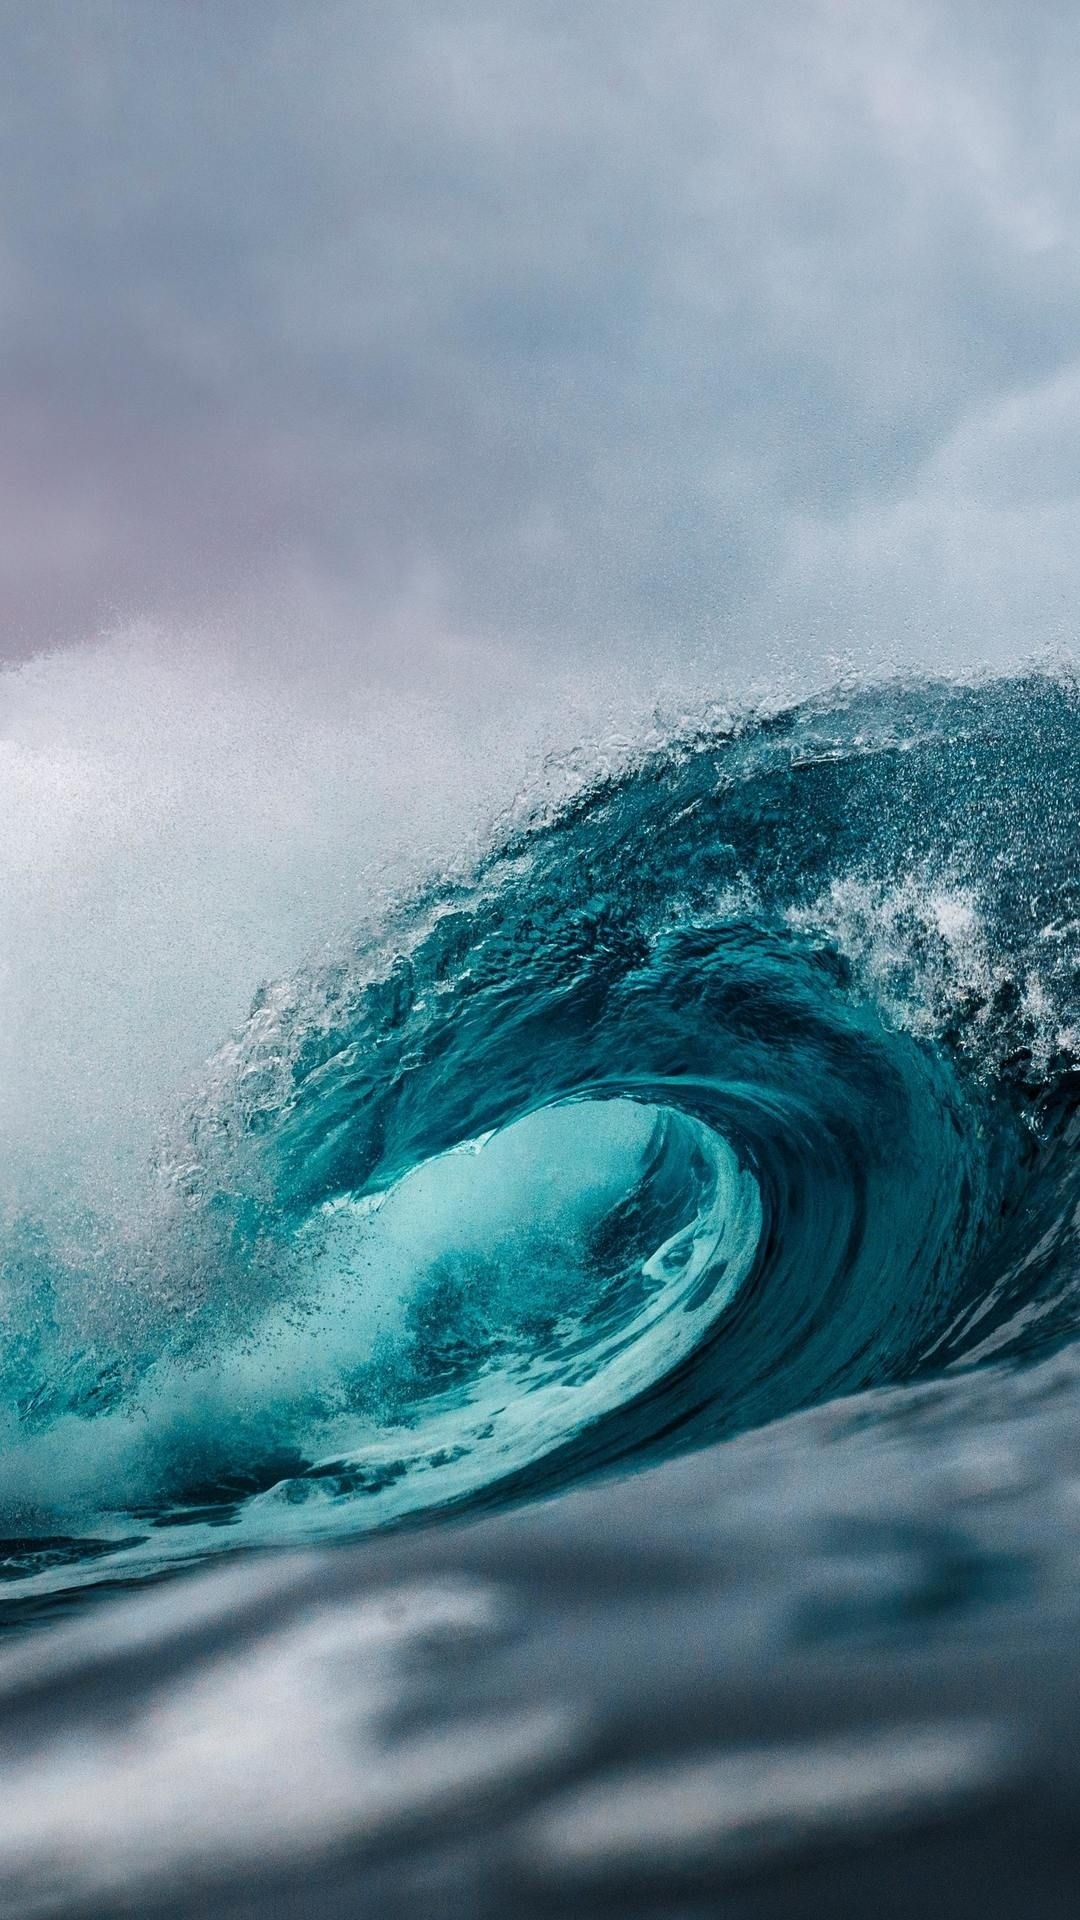 Wave wallpaper for android